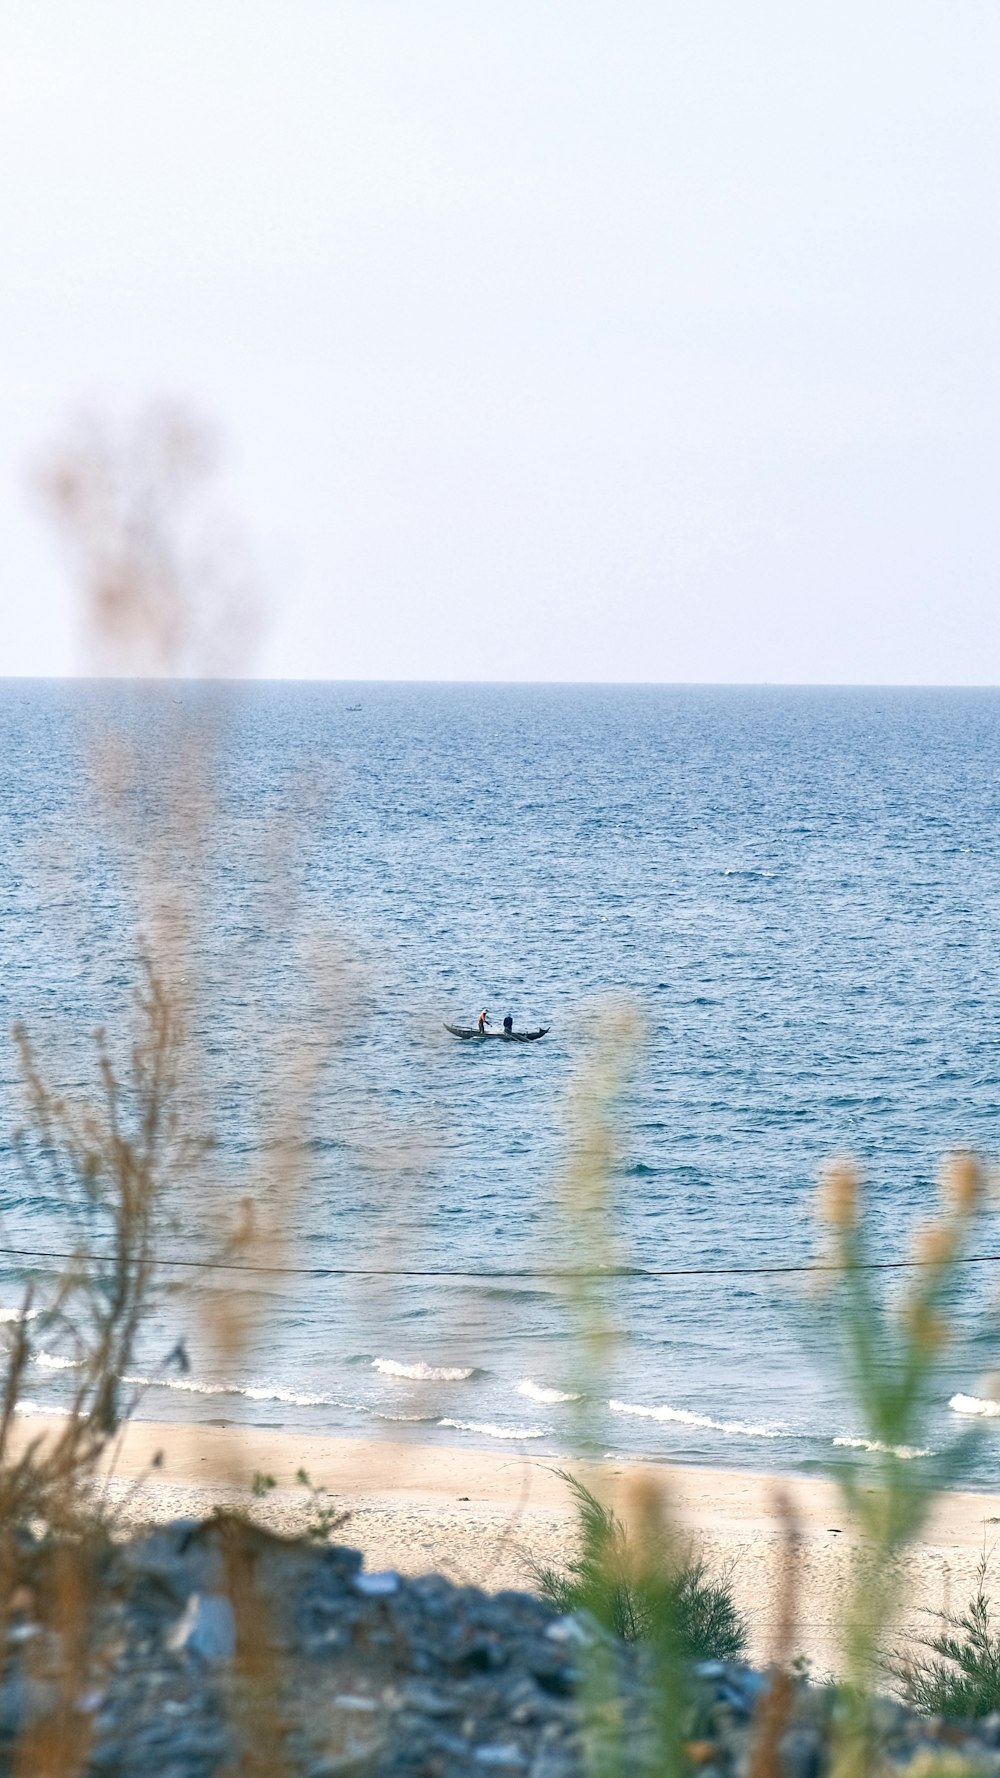 a couple of people in a small boat in the ocean